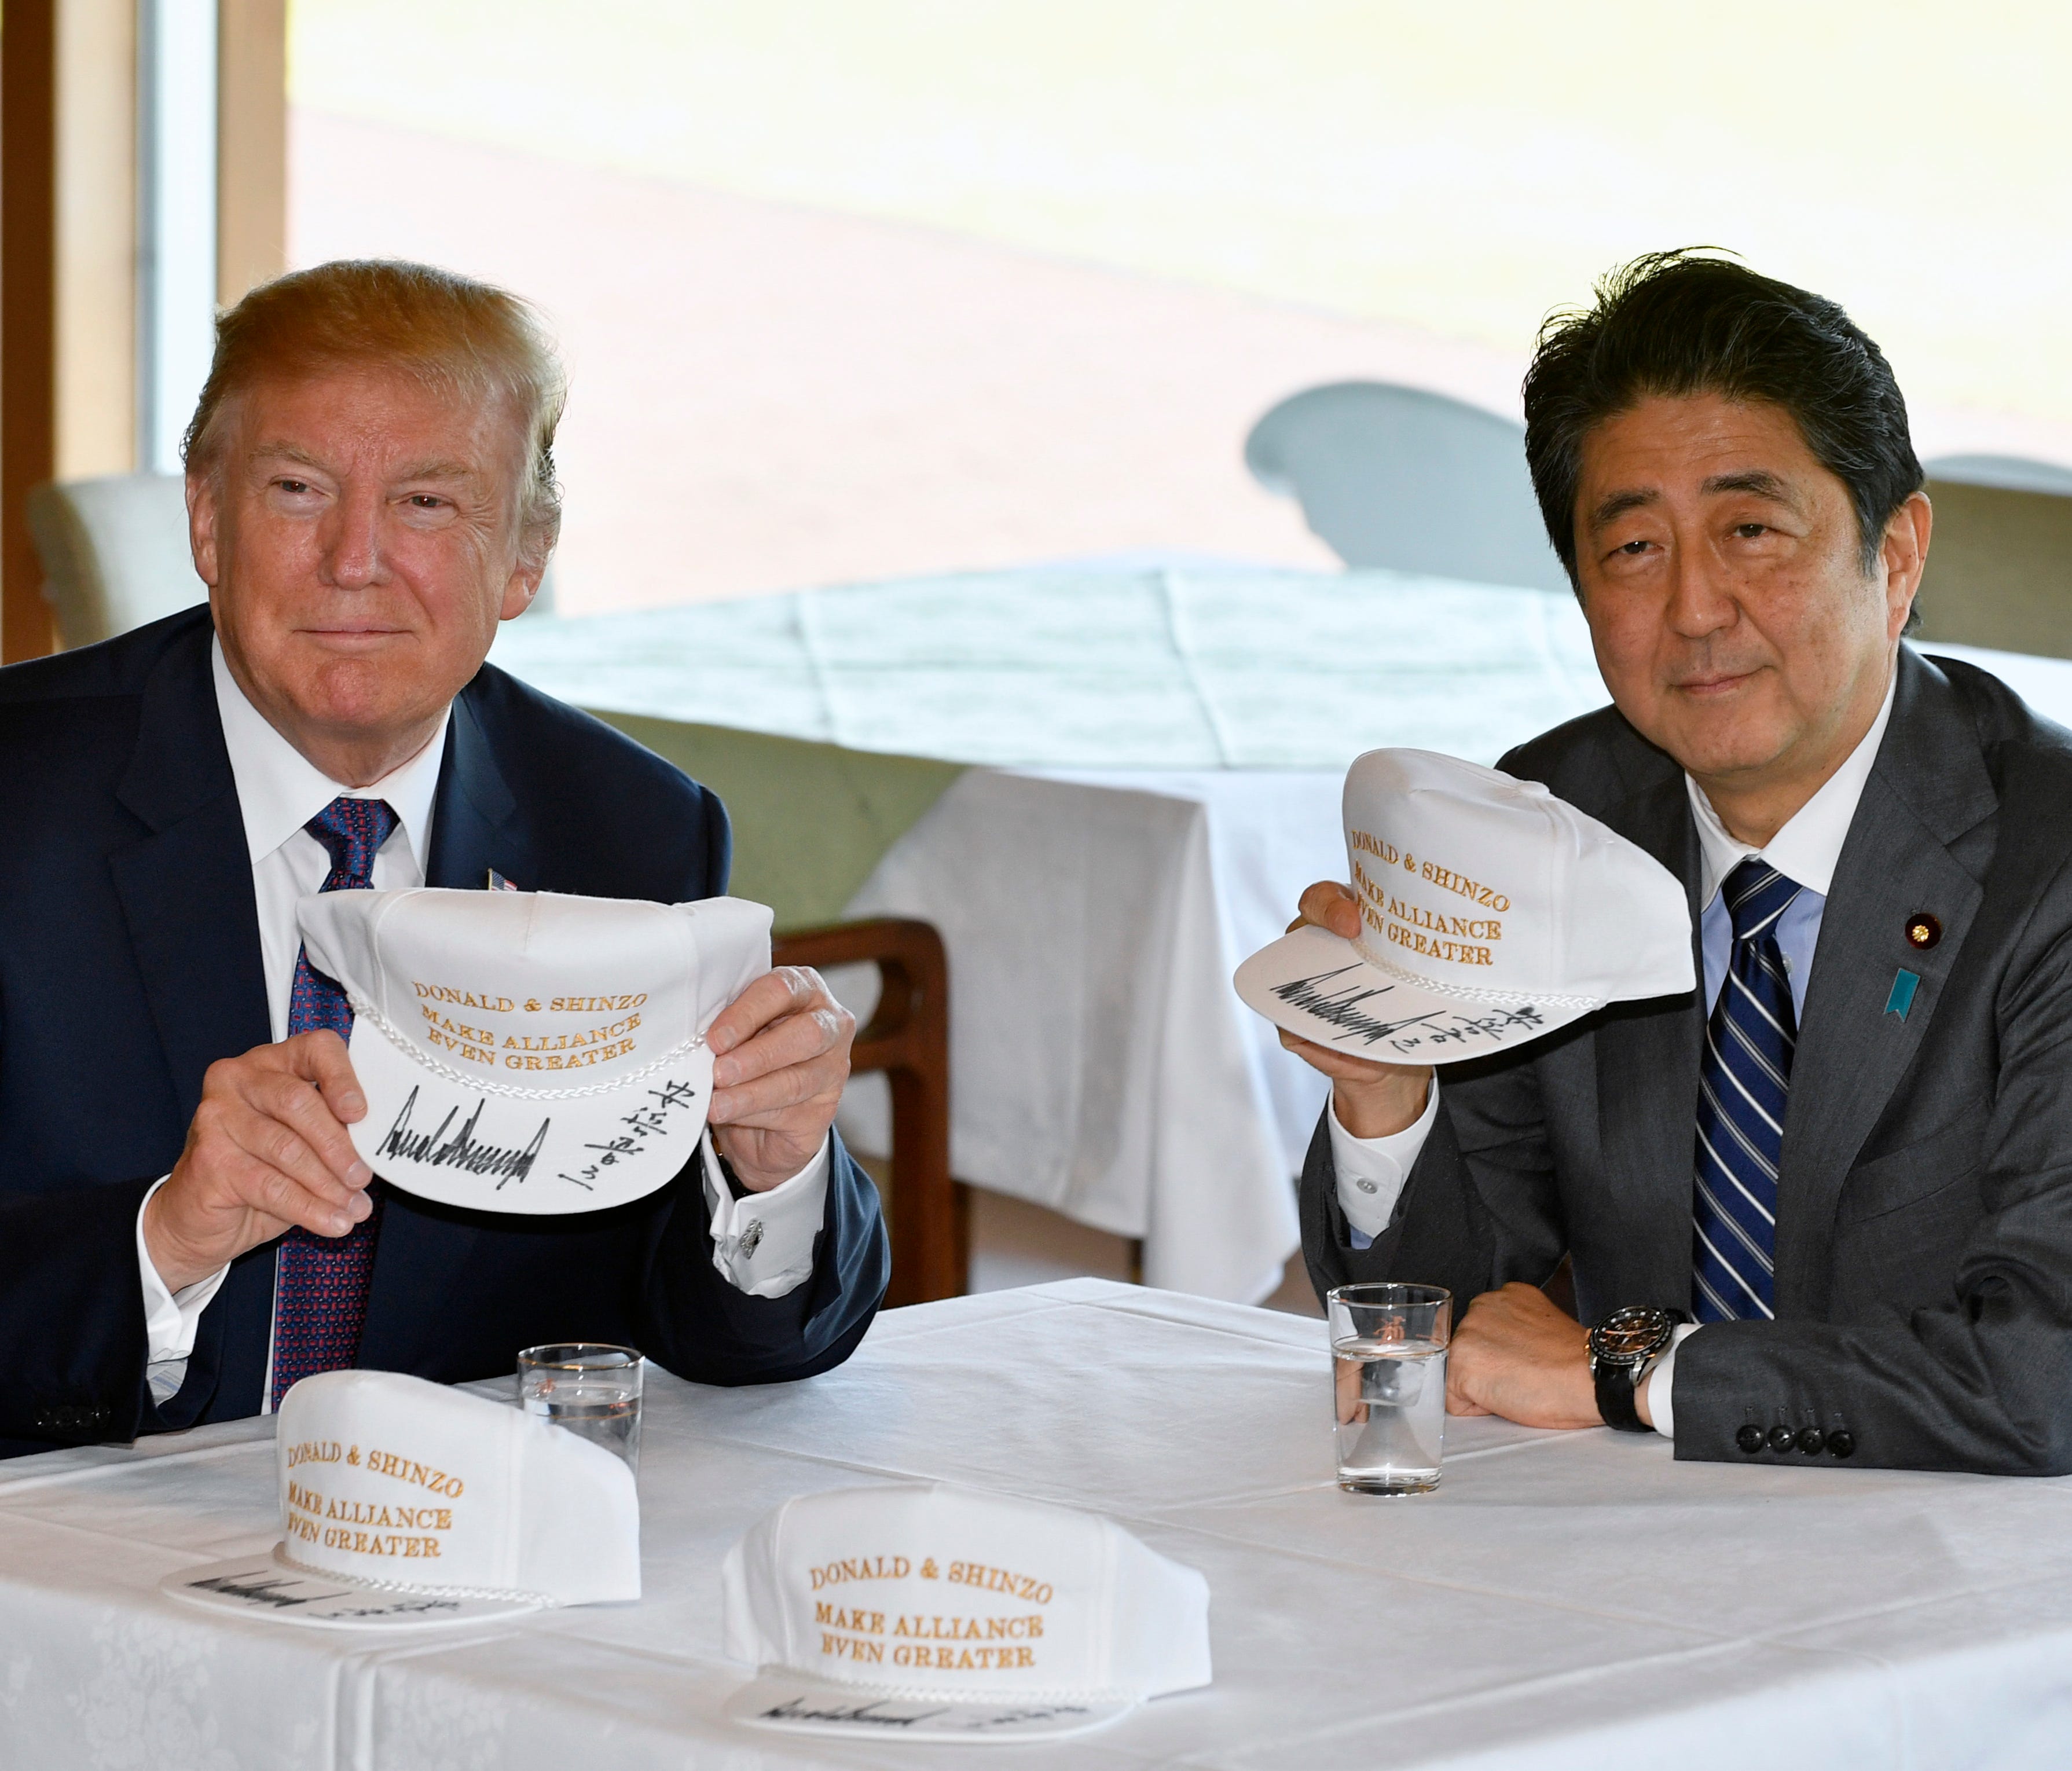 President Trump and Japanese Prime Minister Shinzo Abe pose after they signed hats reading 